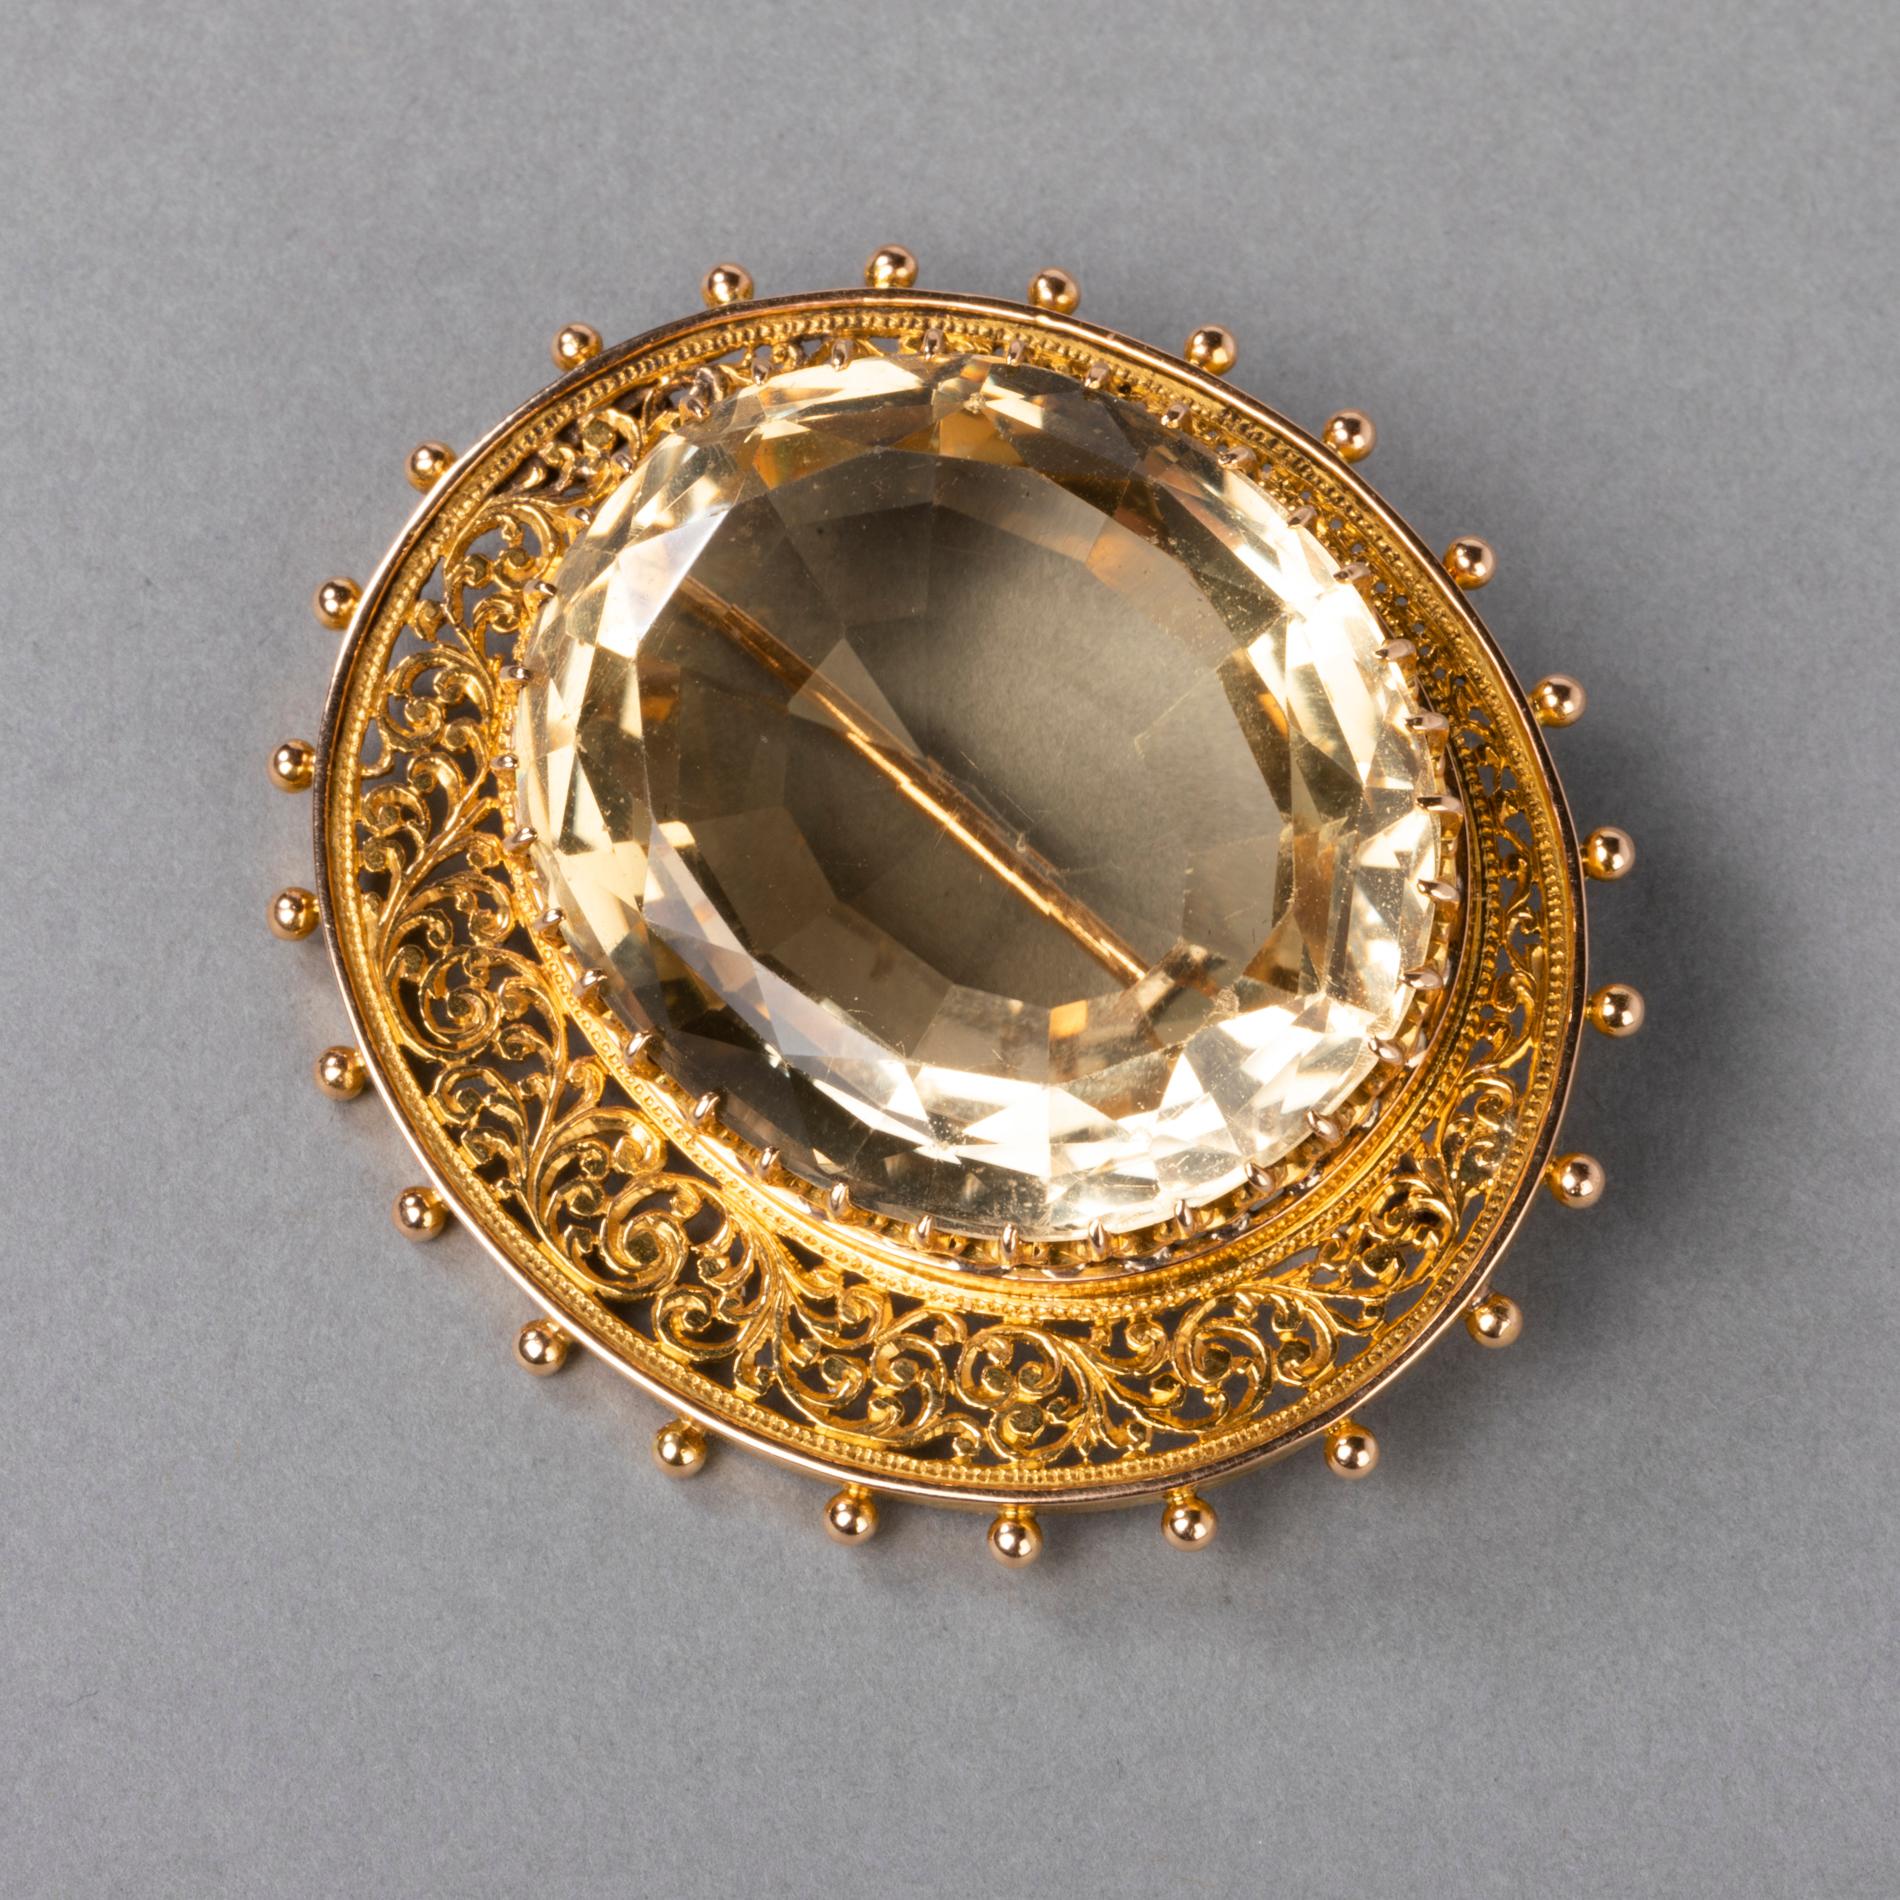 Very beautiful antique brooch, 19th century French made. 
Made in yellow gold 18k and set with a big citrine. The brooch is heavy, 25.70 grams.
Eagle head mark for gold 18k.
The citrine measures 32*25 mm. 
The brooch measures 4.5 cm * 4 cm.